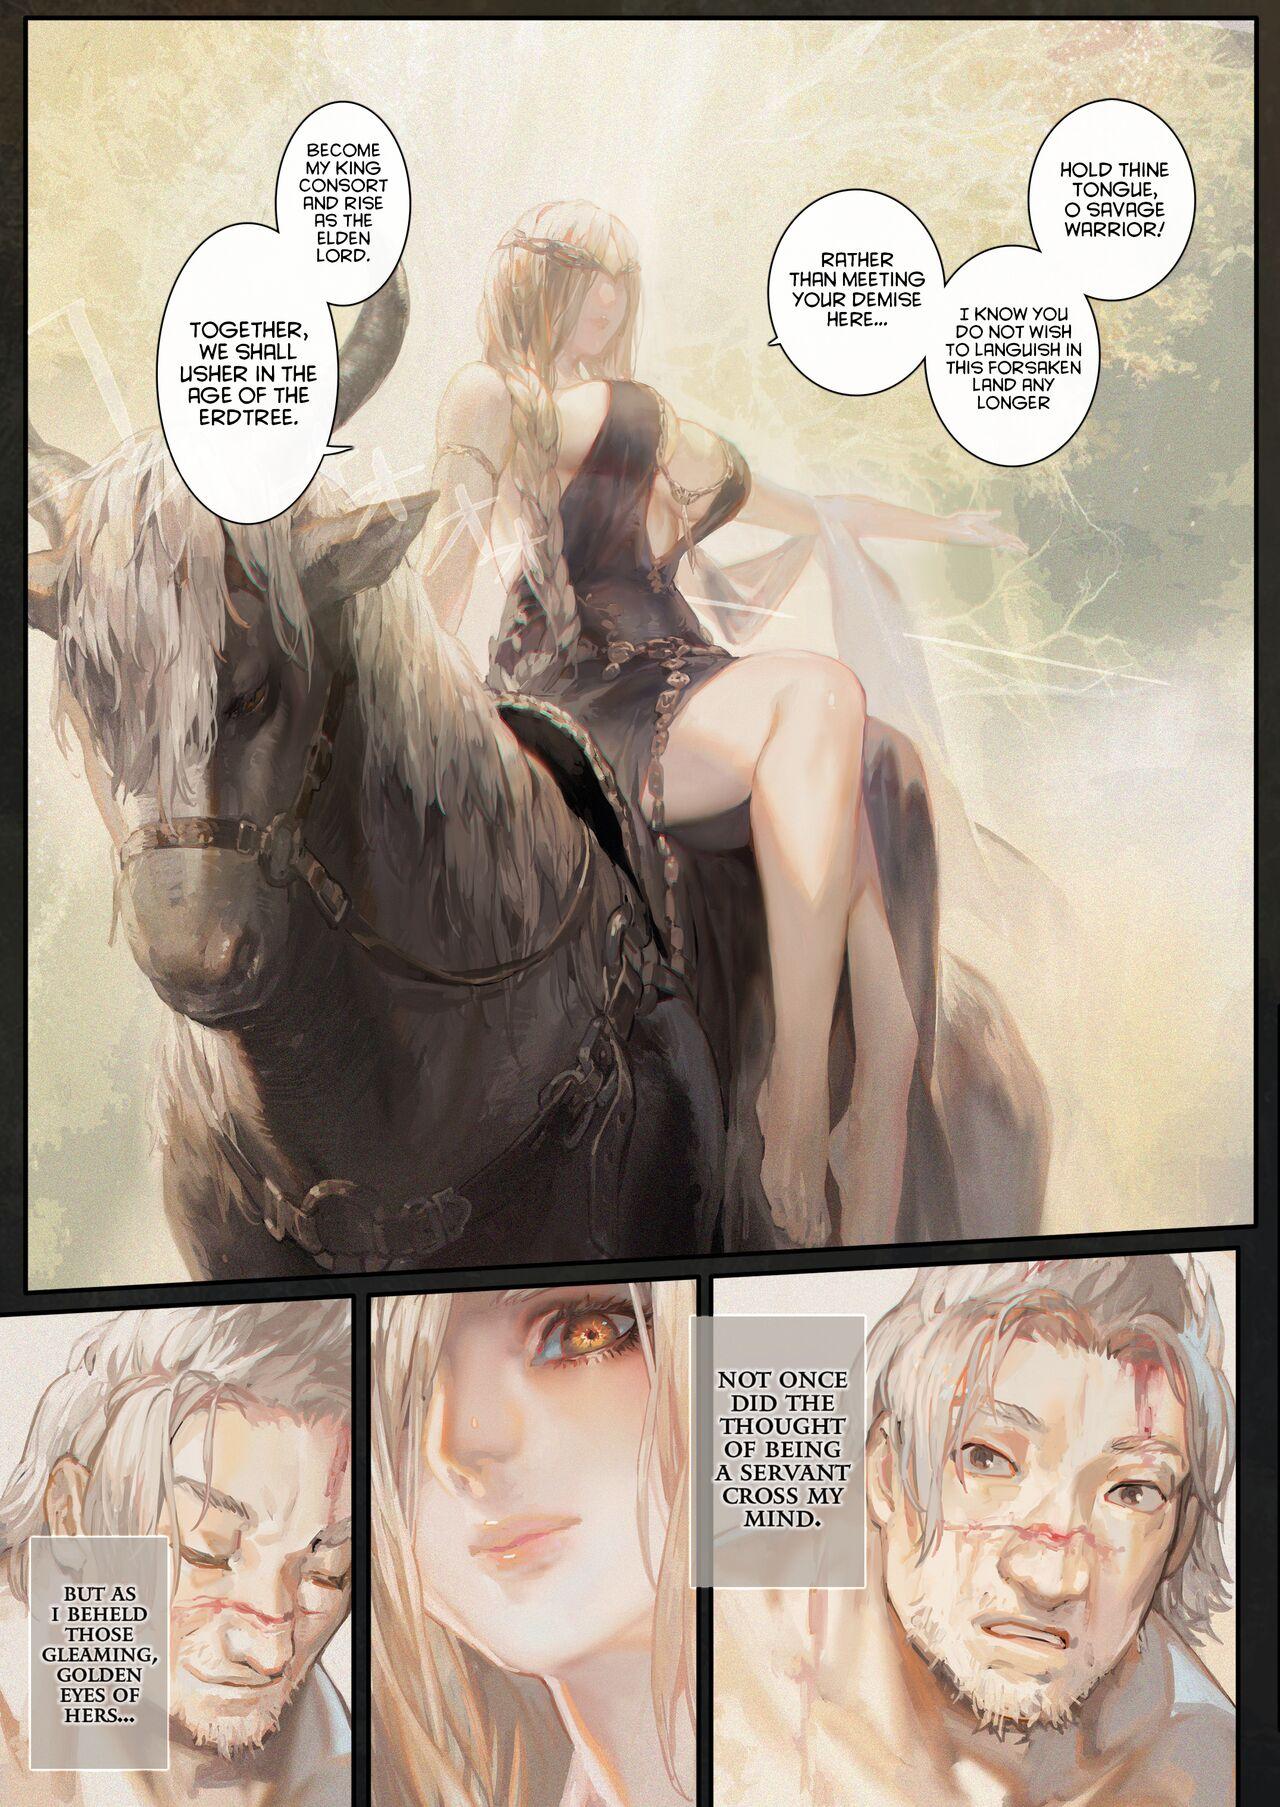 Blowjob At the base of the Erdtree - Elden ring Blondes - Page 3